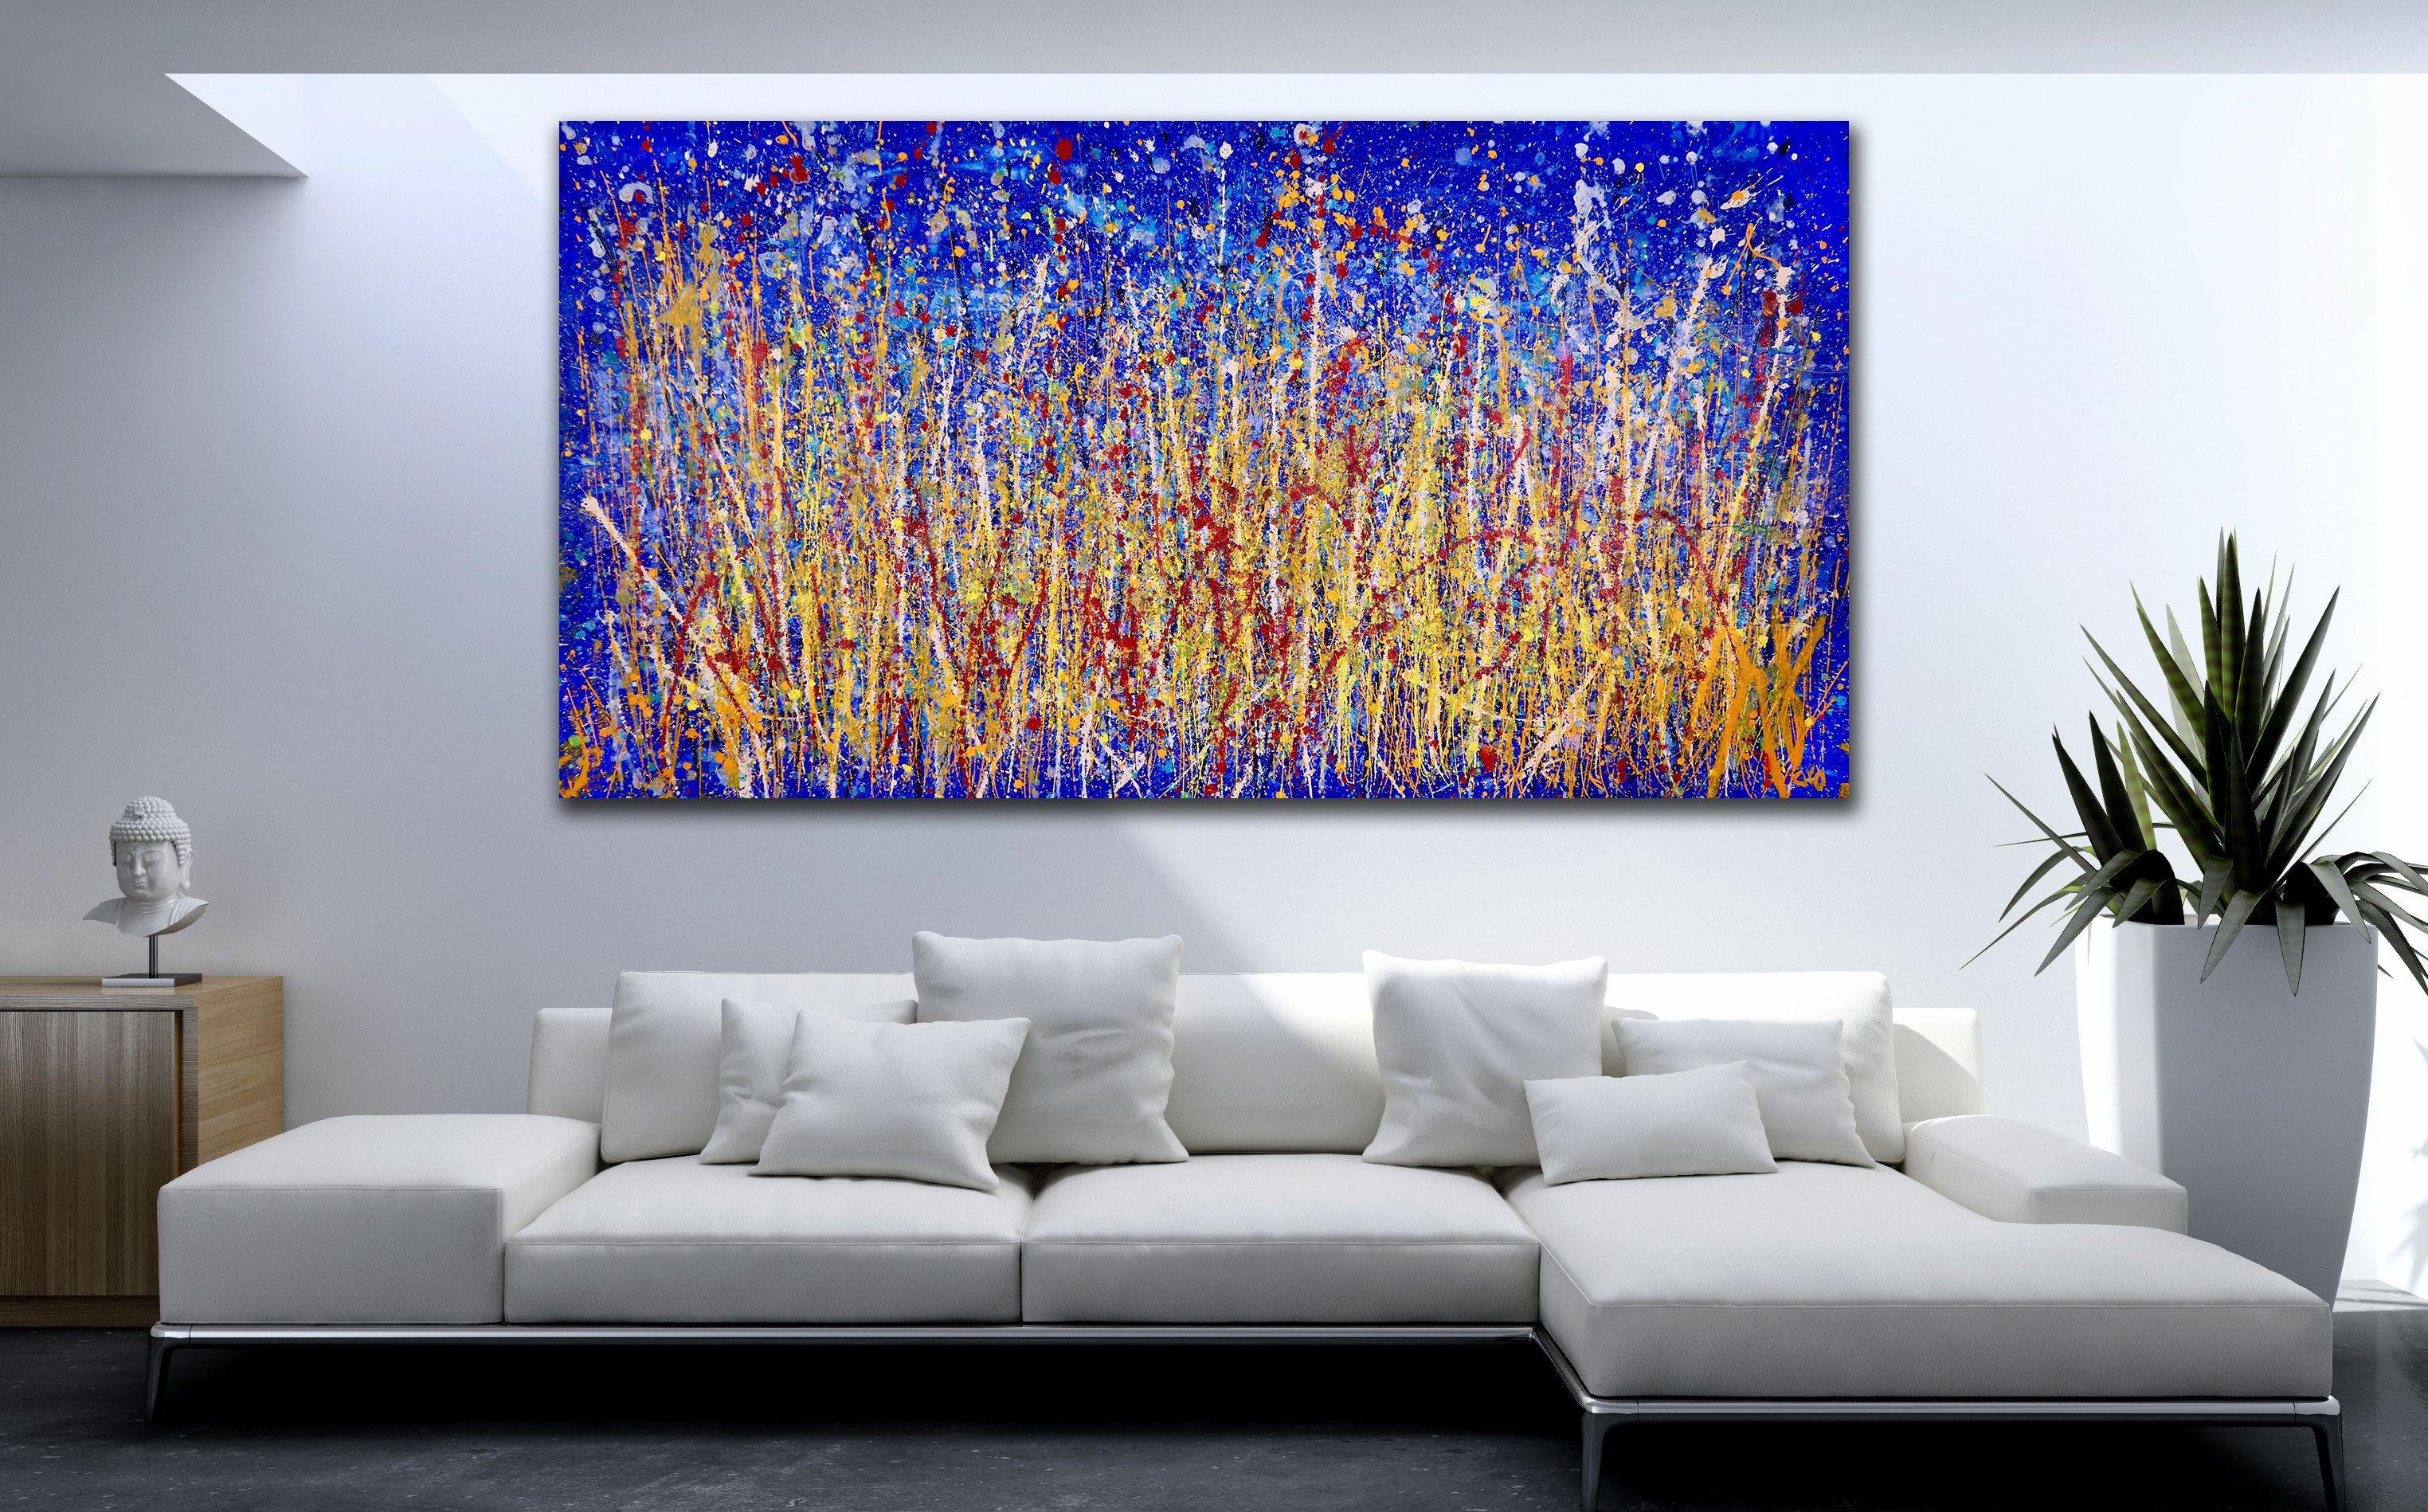 Oversized bold and very detailed piece with contrasting color blending, lots of drips and big palette knife strokes. This painting was completed after thousands of paint strokes of many color arrange all in motion and harmony full of light and fast